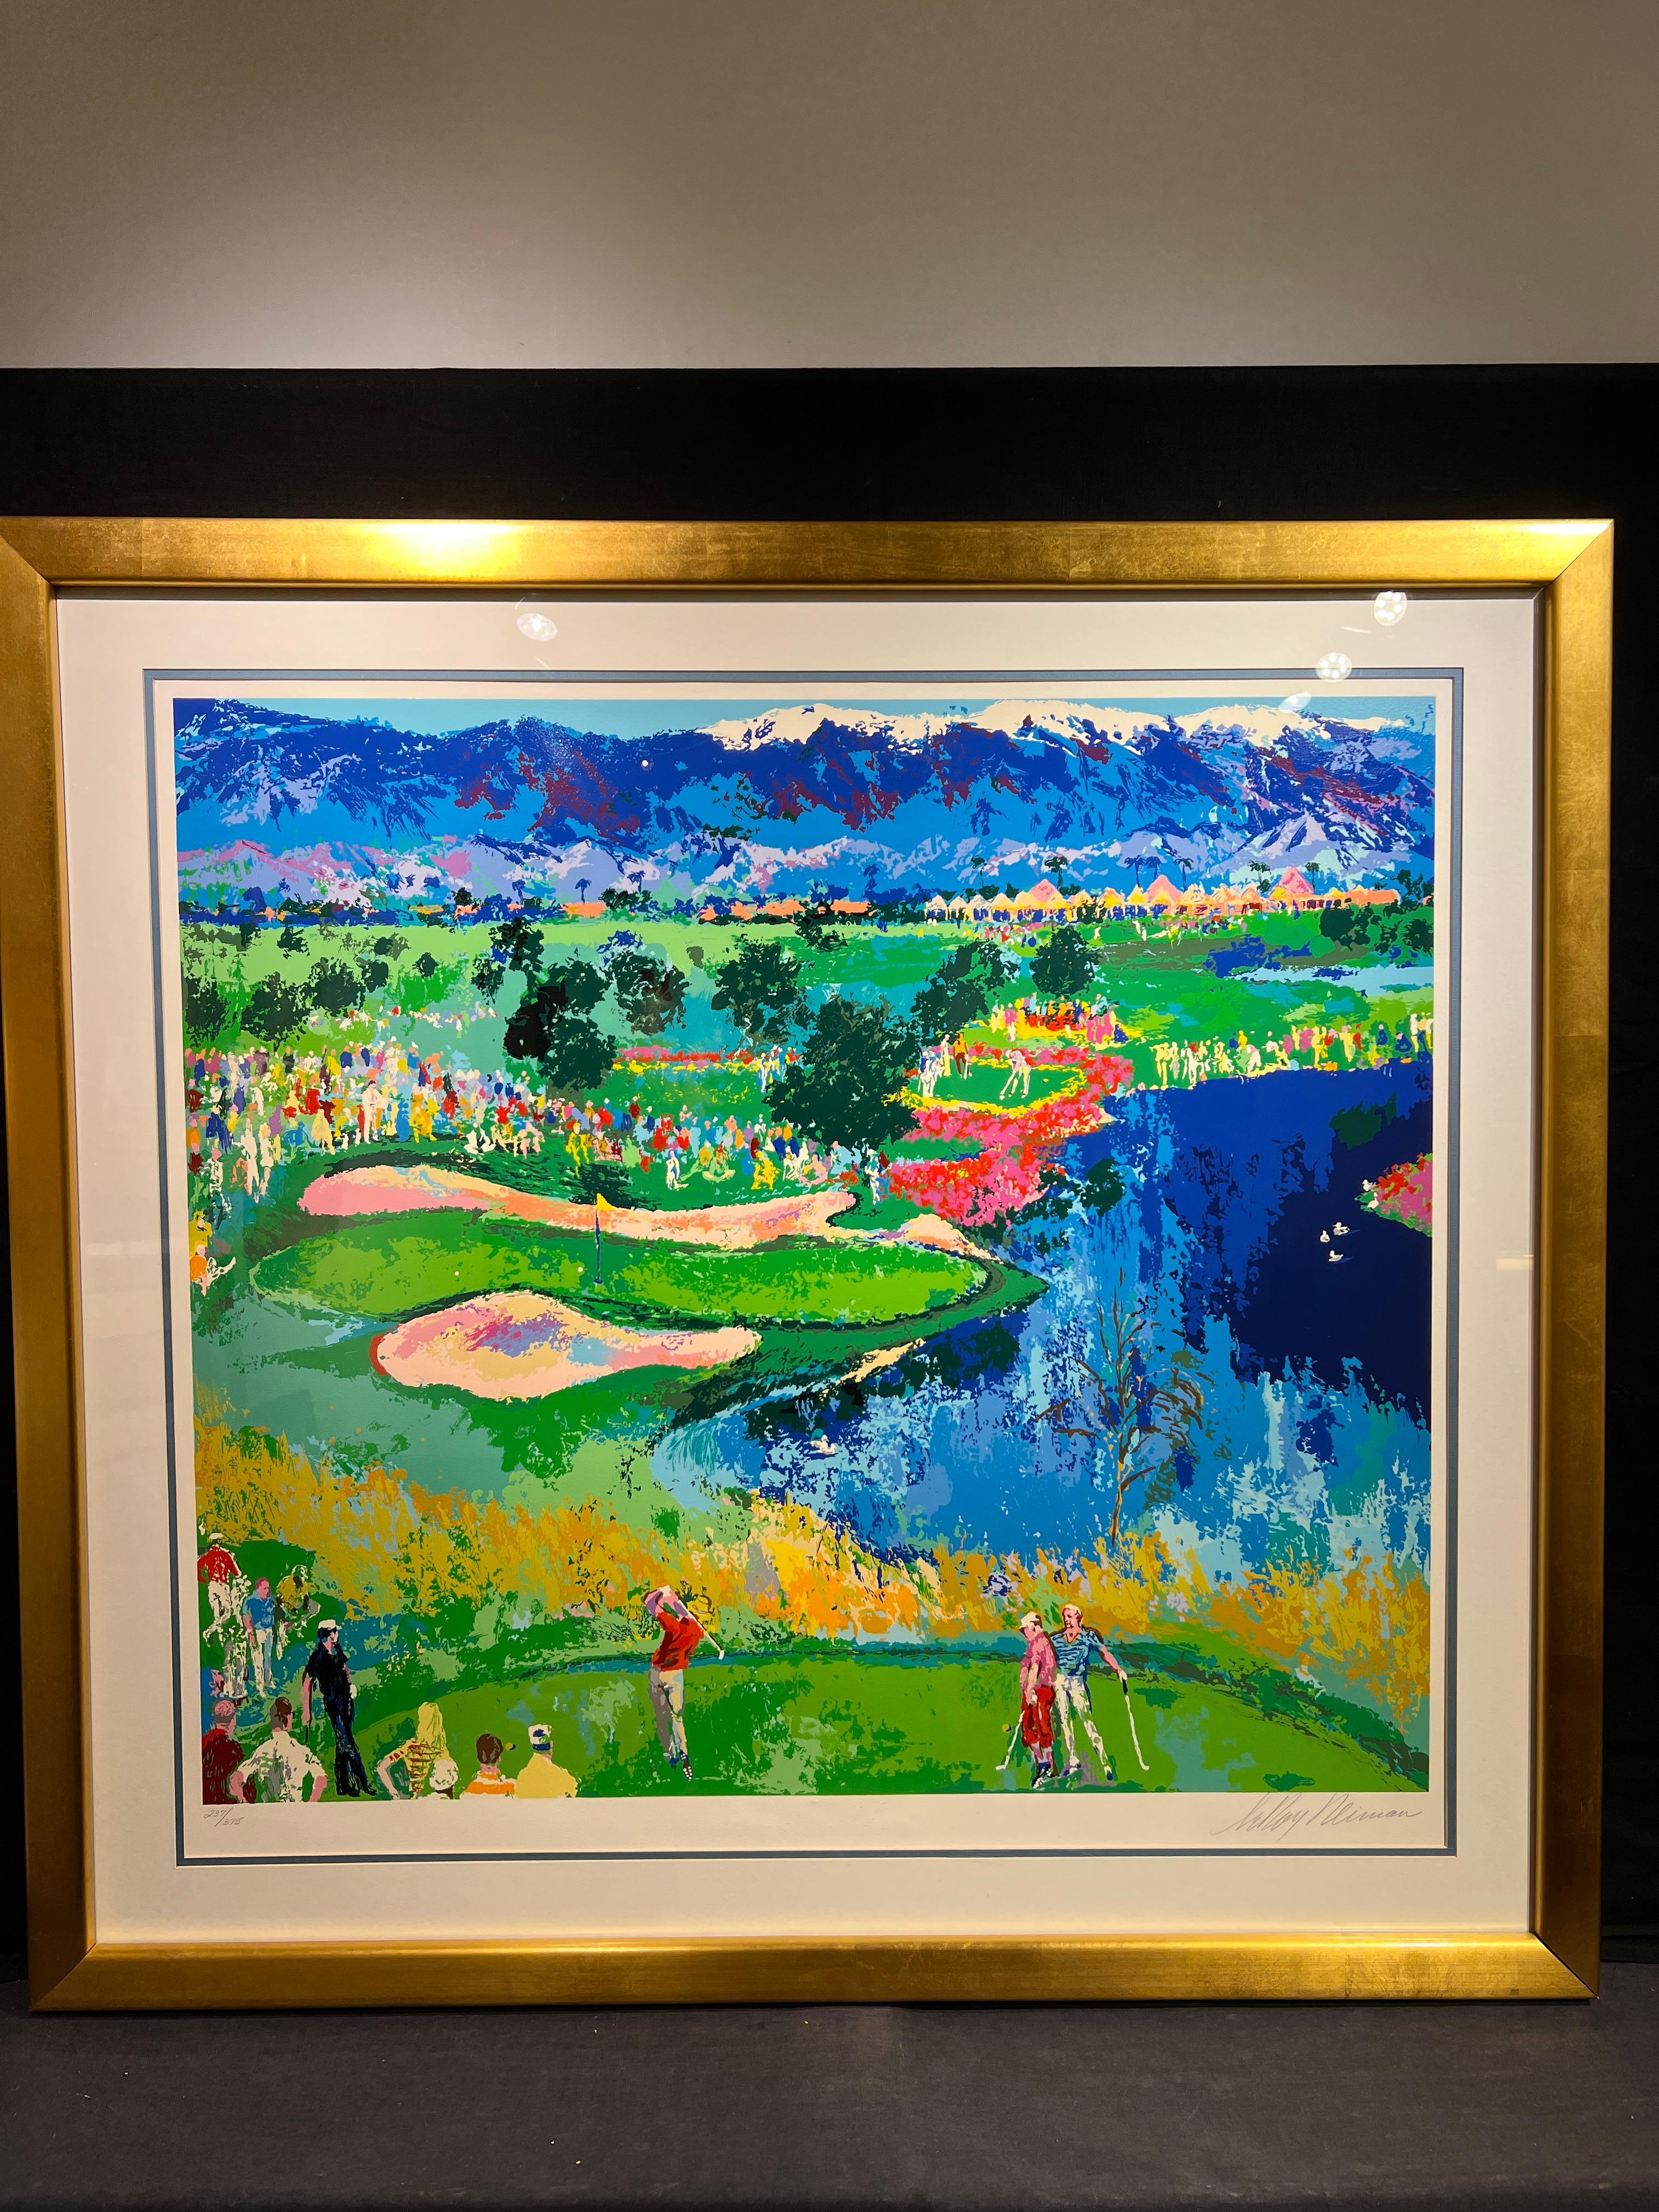 Cove at Vintage - American Modern Print by Leroy Neiman